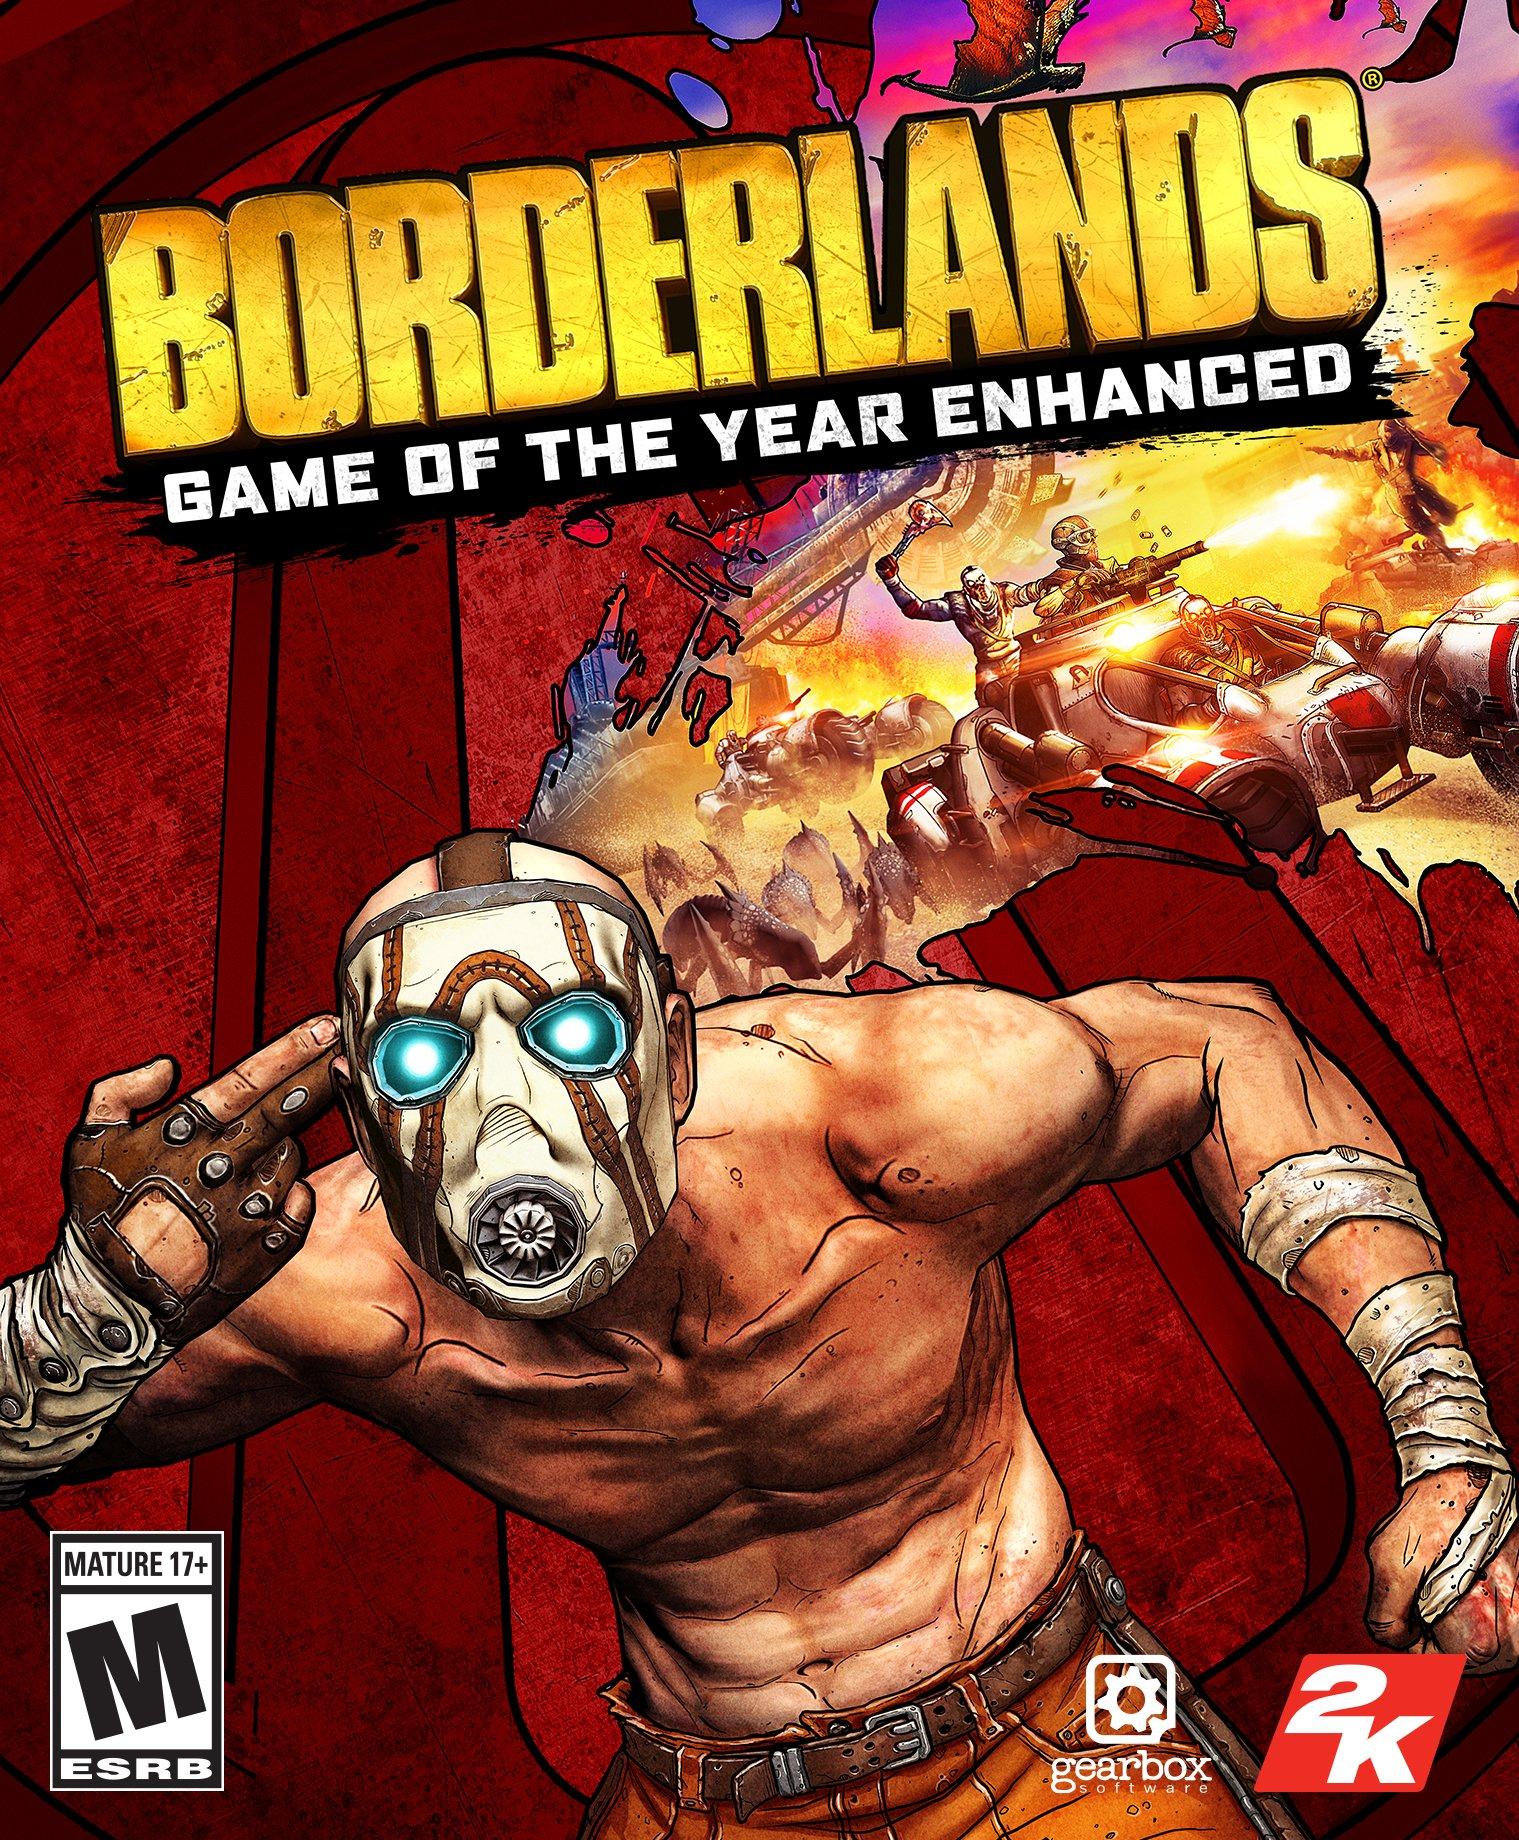 trade-in-borderlands-game-of-the-year-enhanced-pc-gamestop